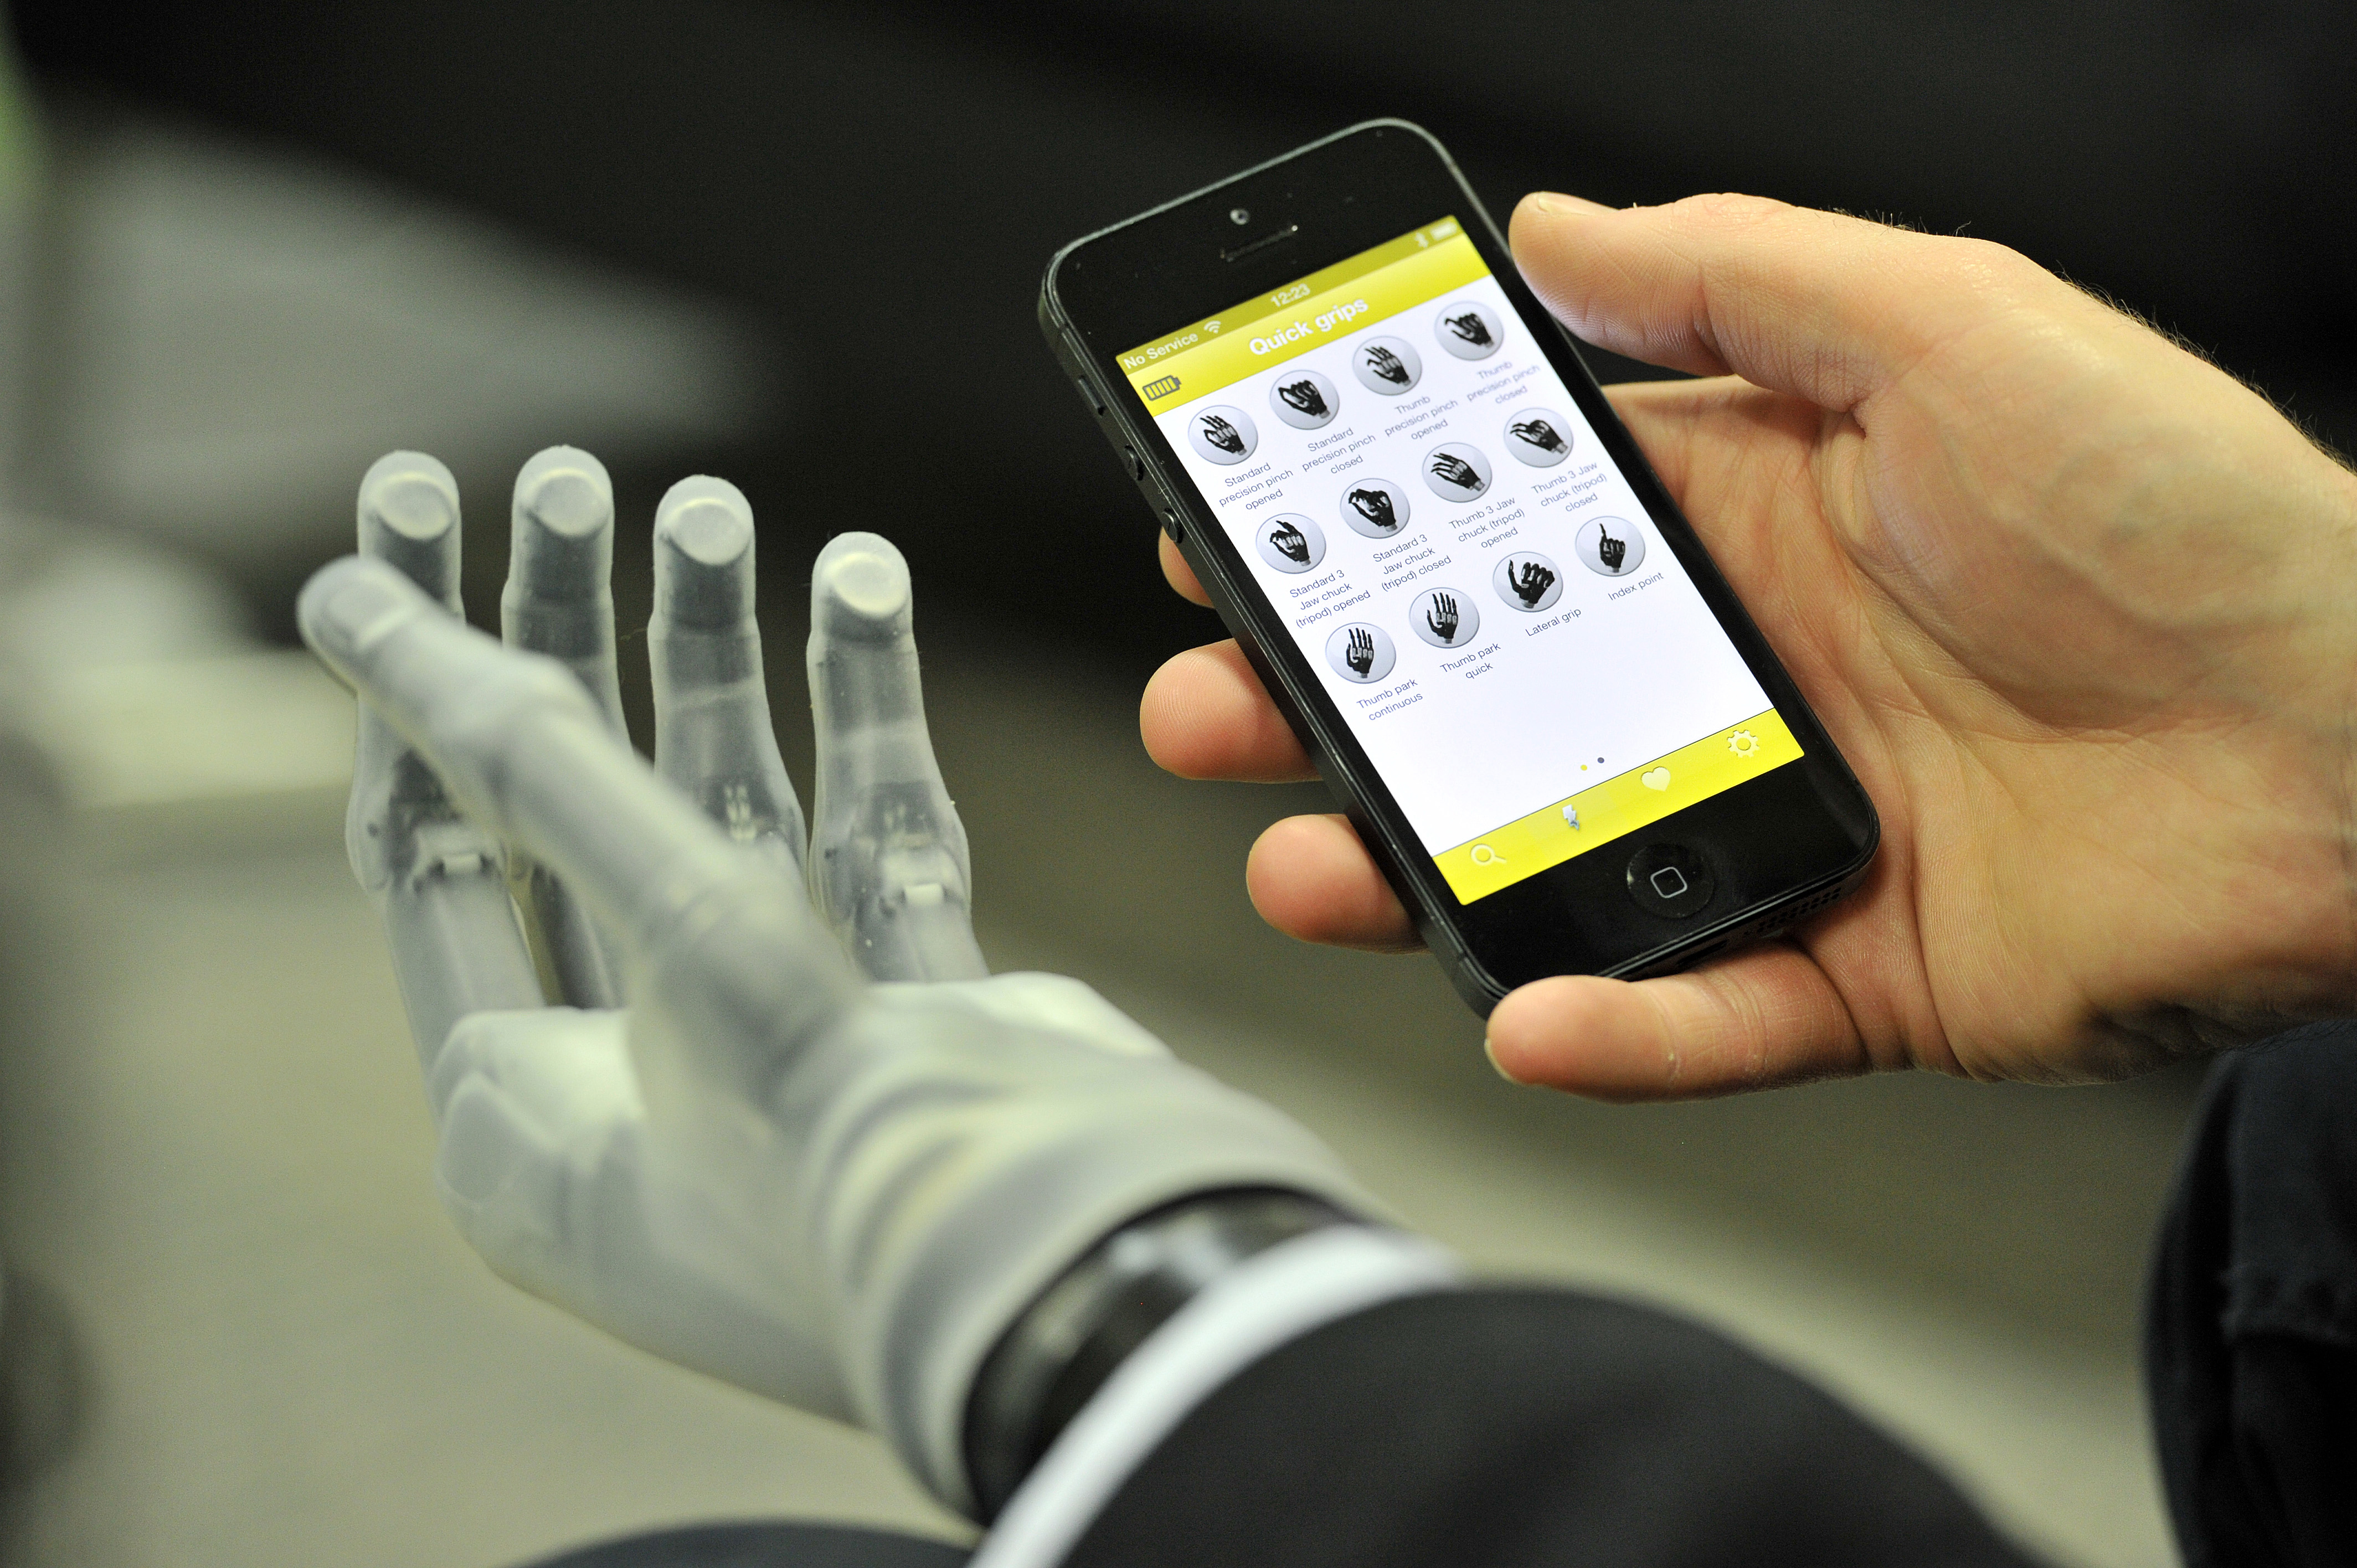 First Bionic Hand Controlled by Smartphone App